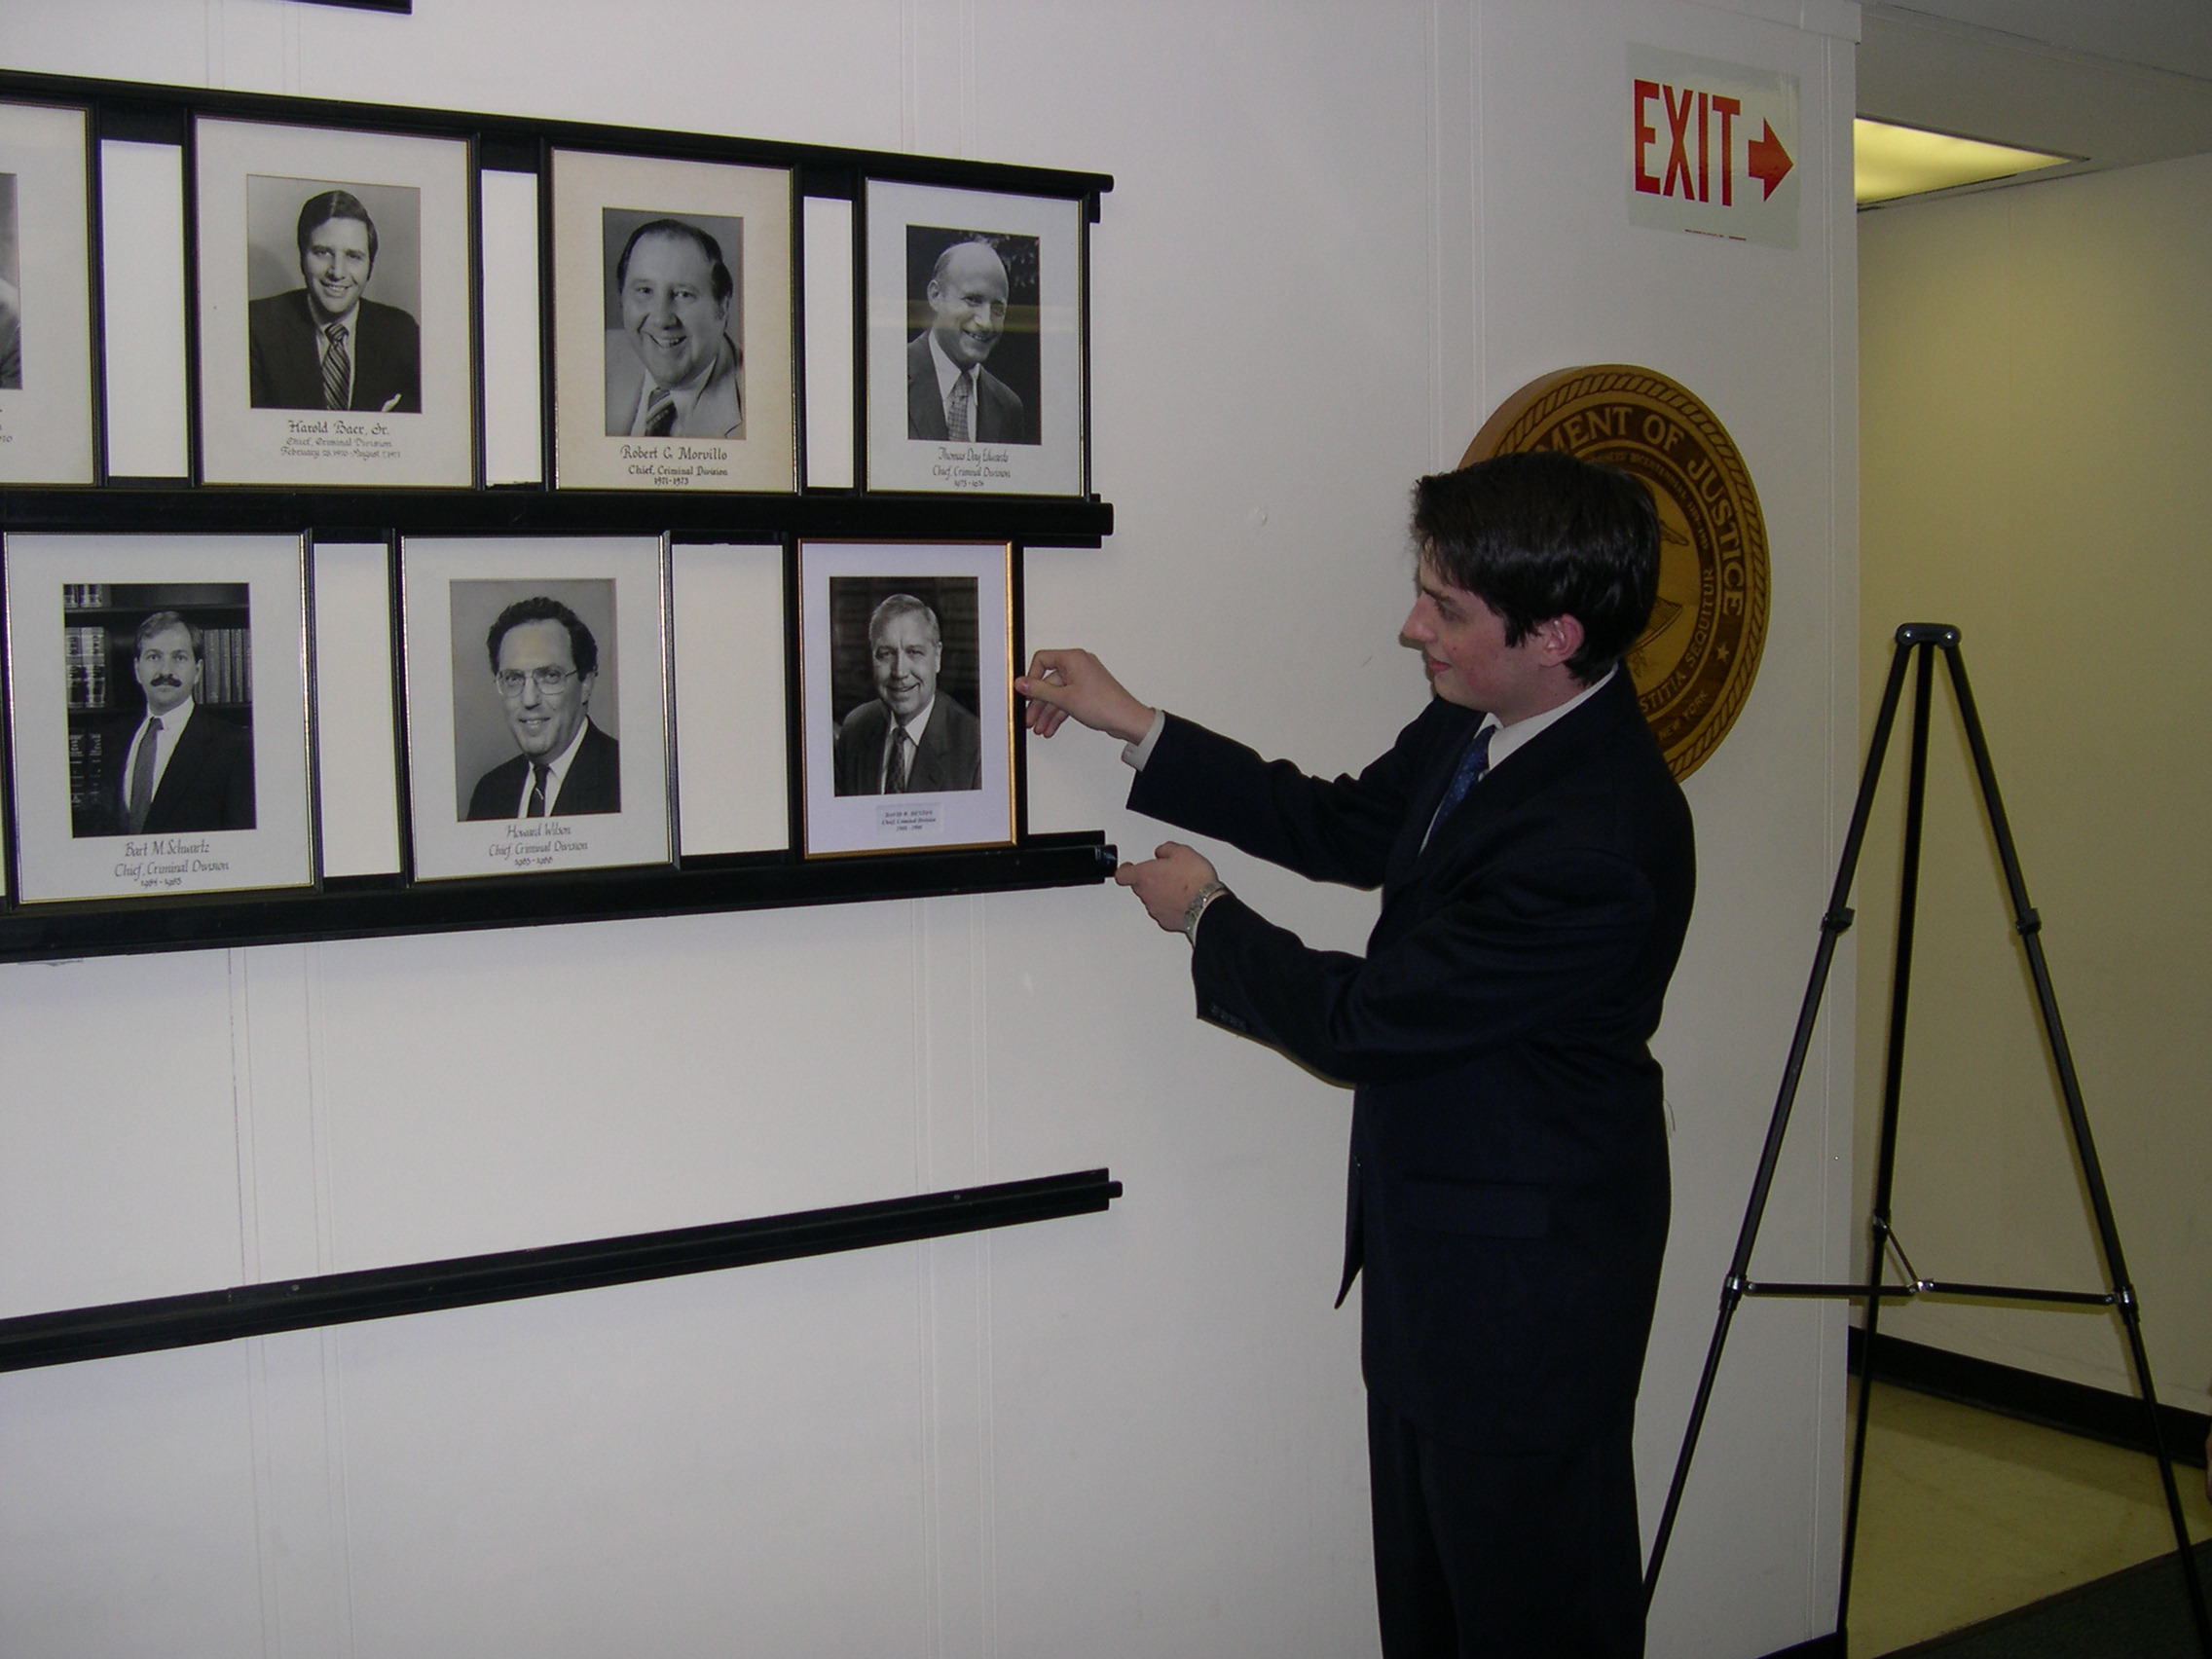 David Denton Jr. placing his father's portrait among the other previous Criminal Division Chiefs on May 14, 2007.